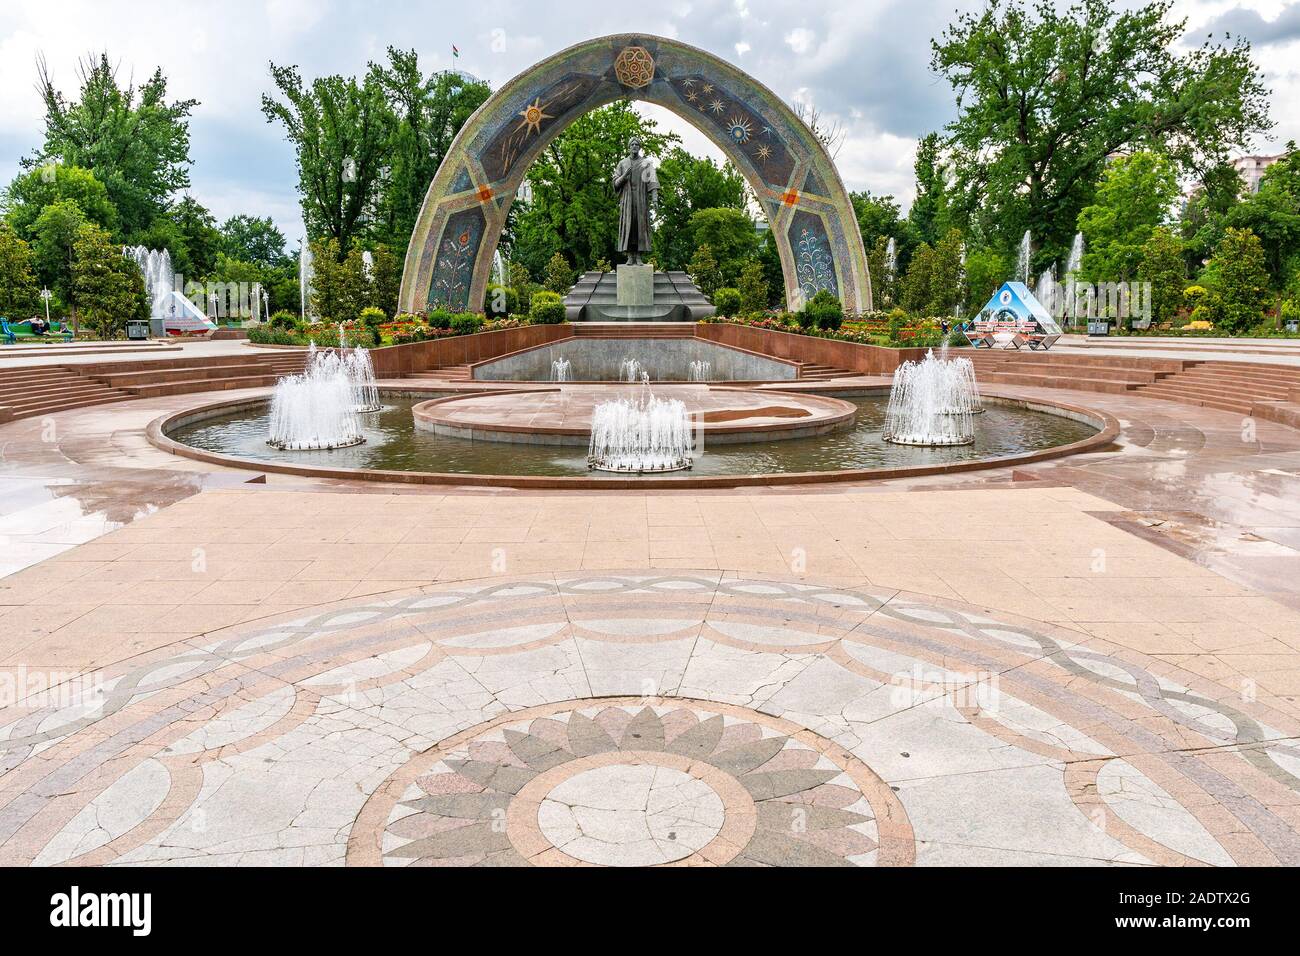 Dushanbe Abu Abdullah Rudaki Park Statue Picturesque View with Fountain on a Cloudy Rainy Day Stock Photo